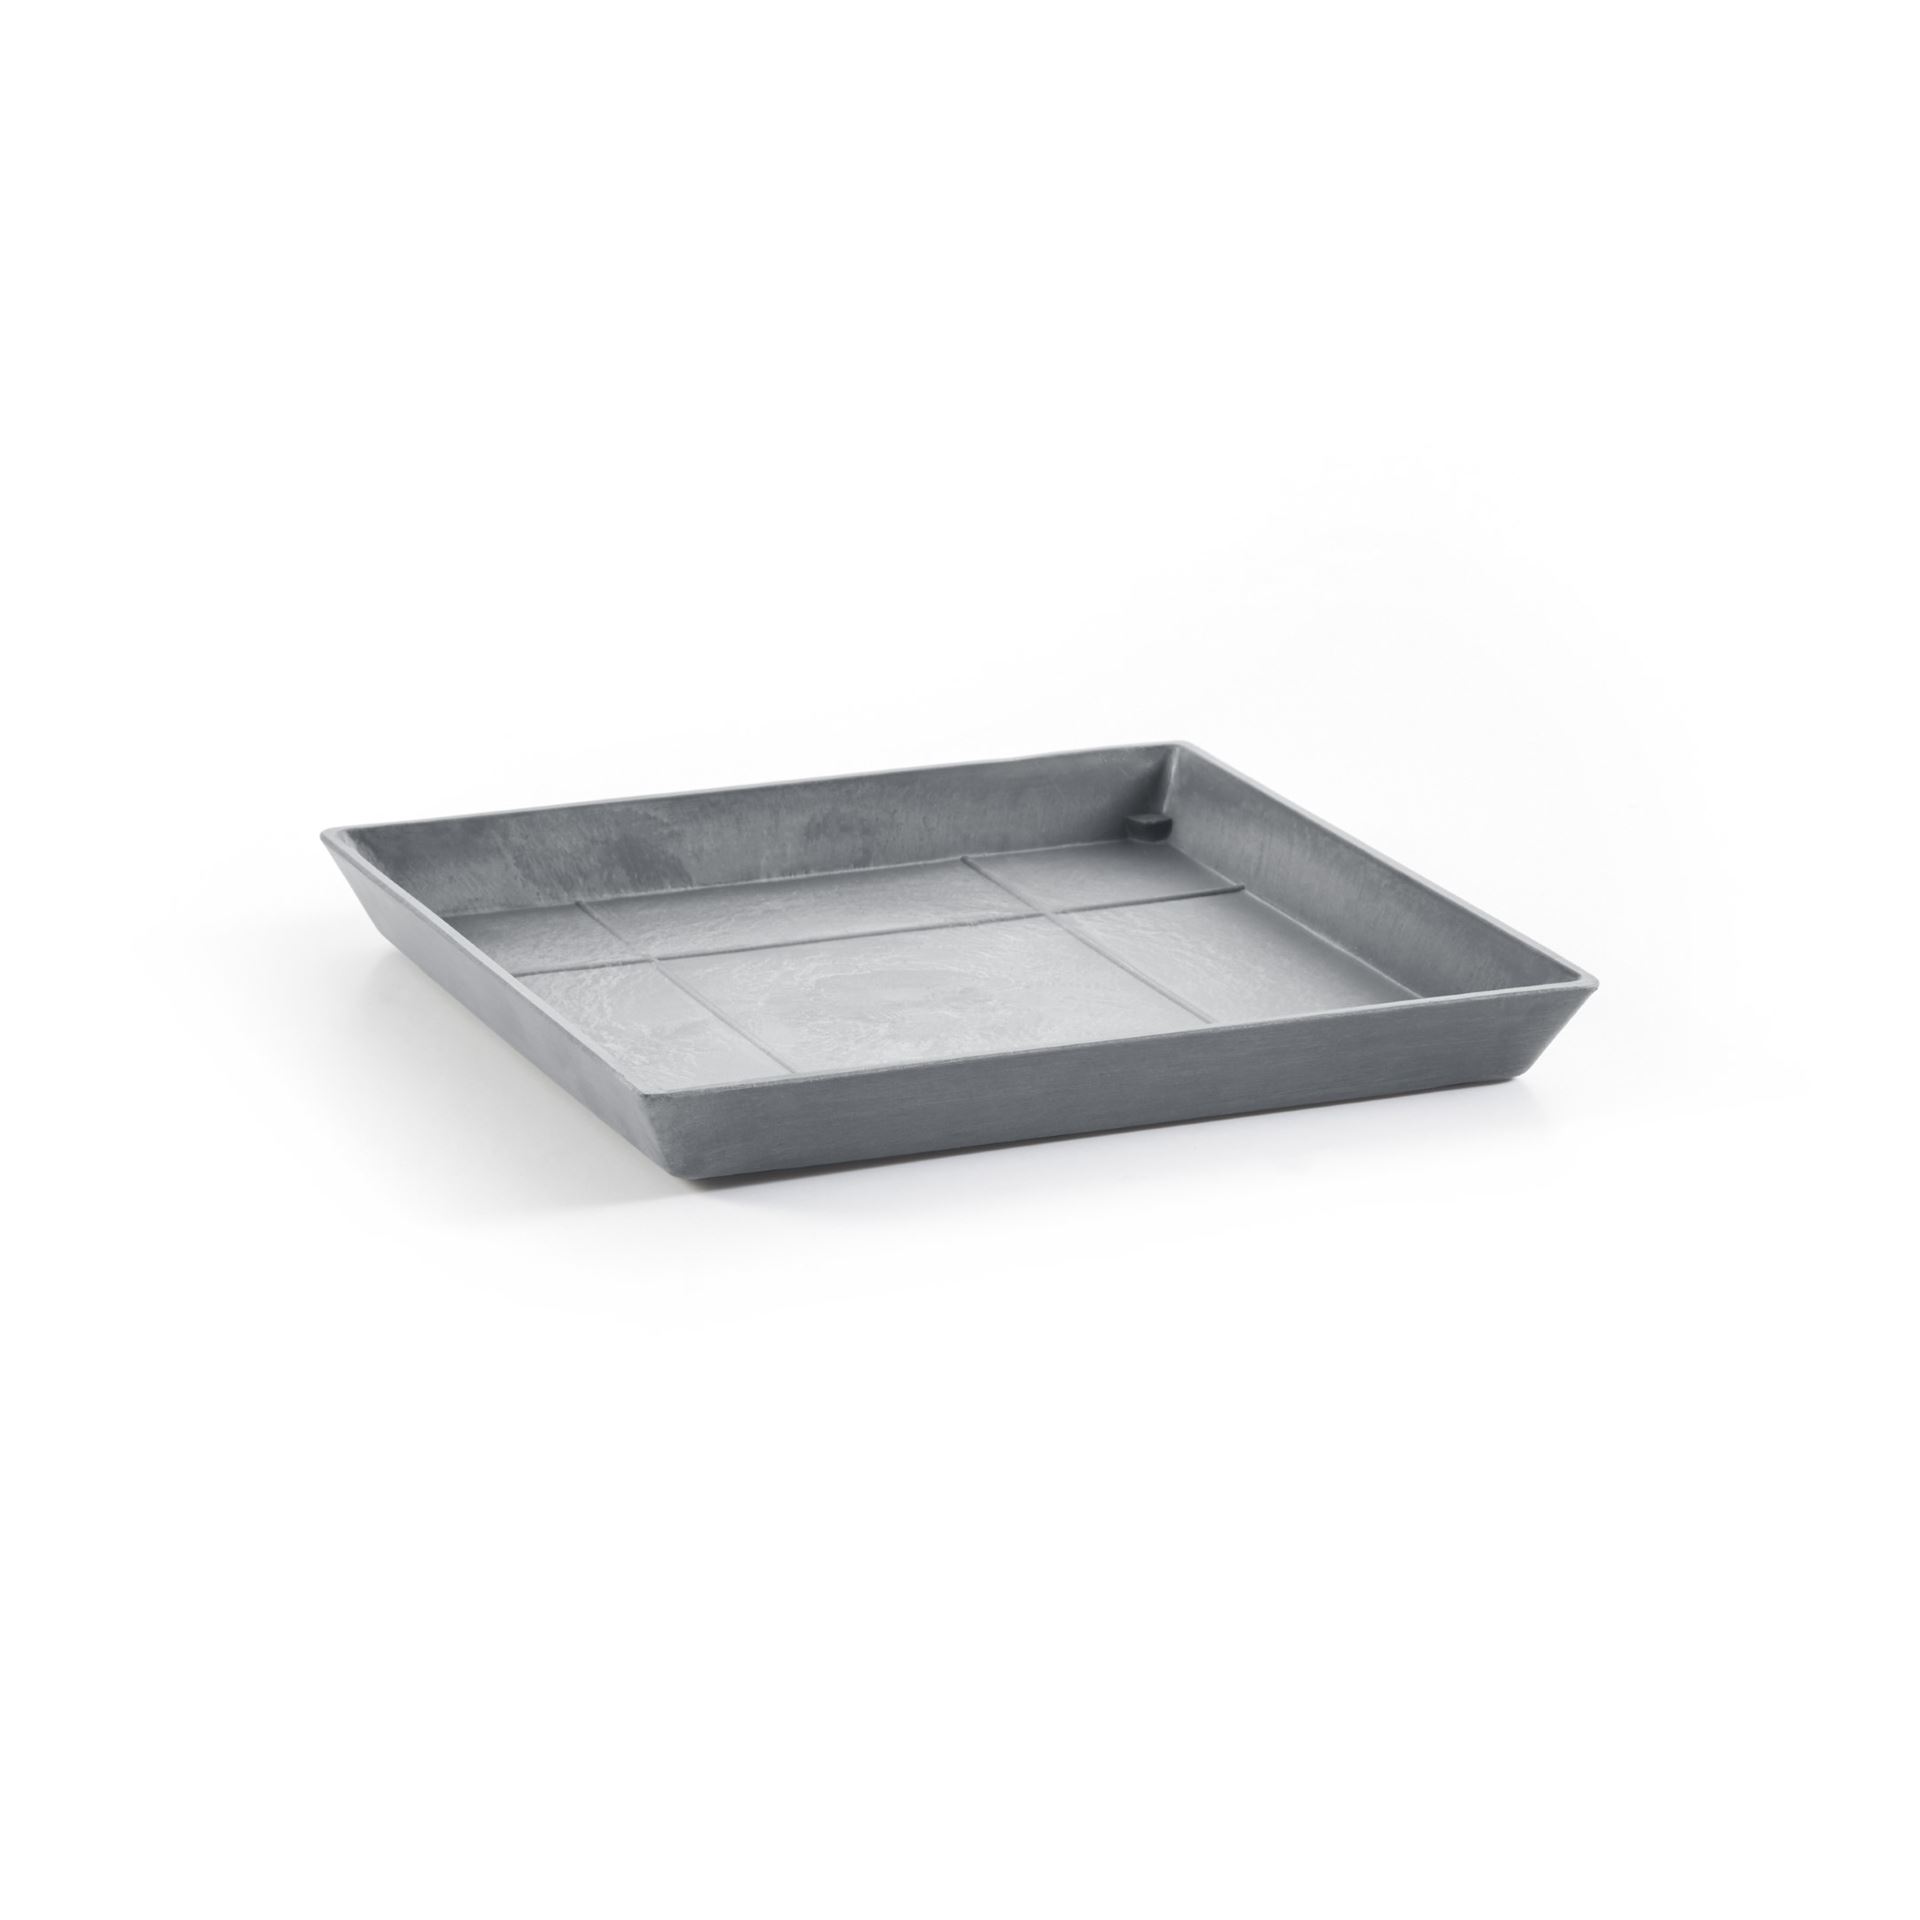 Ecopots Saucer Square - Blue Grey - 35.5 x H3.5 cm - Square blue-gray saucer with water reservoir